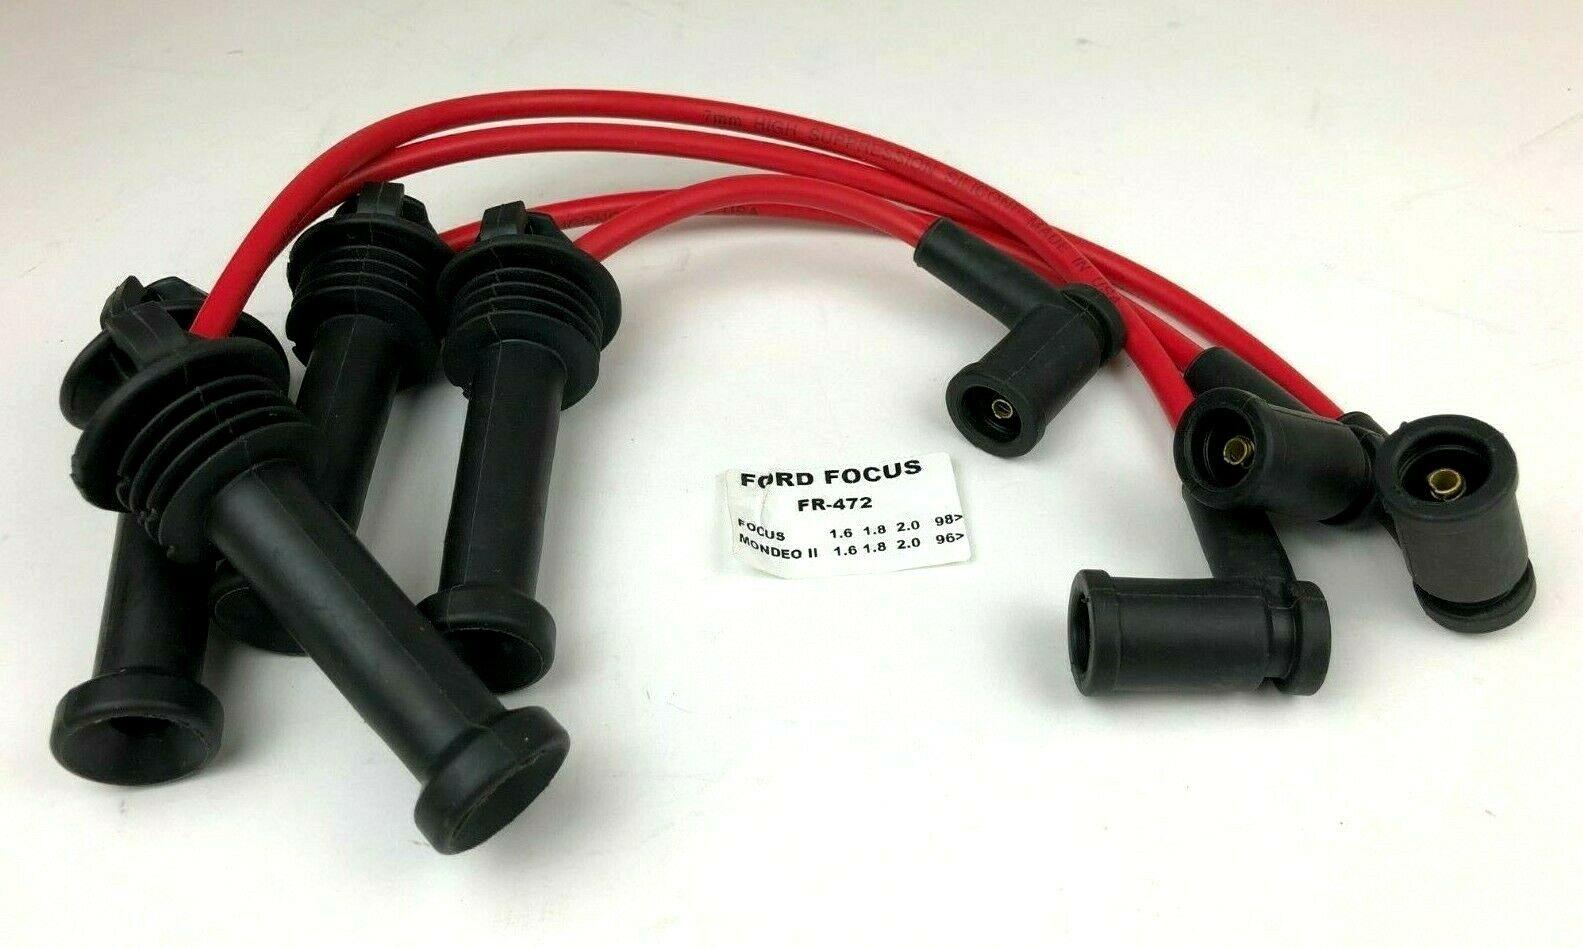 RED HT Spark Ignition Lead Cable SET for FORD Focus and Mondeo II 1.6 1.8 2.0